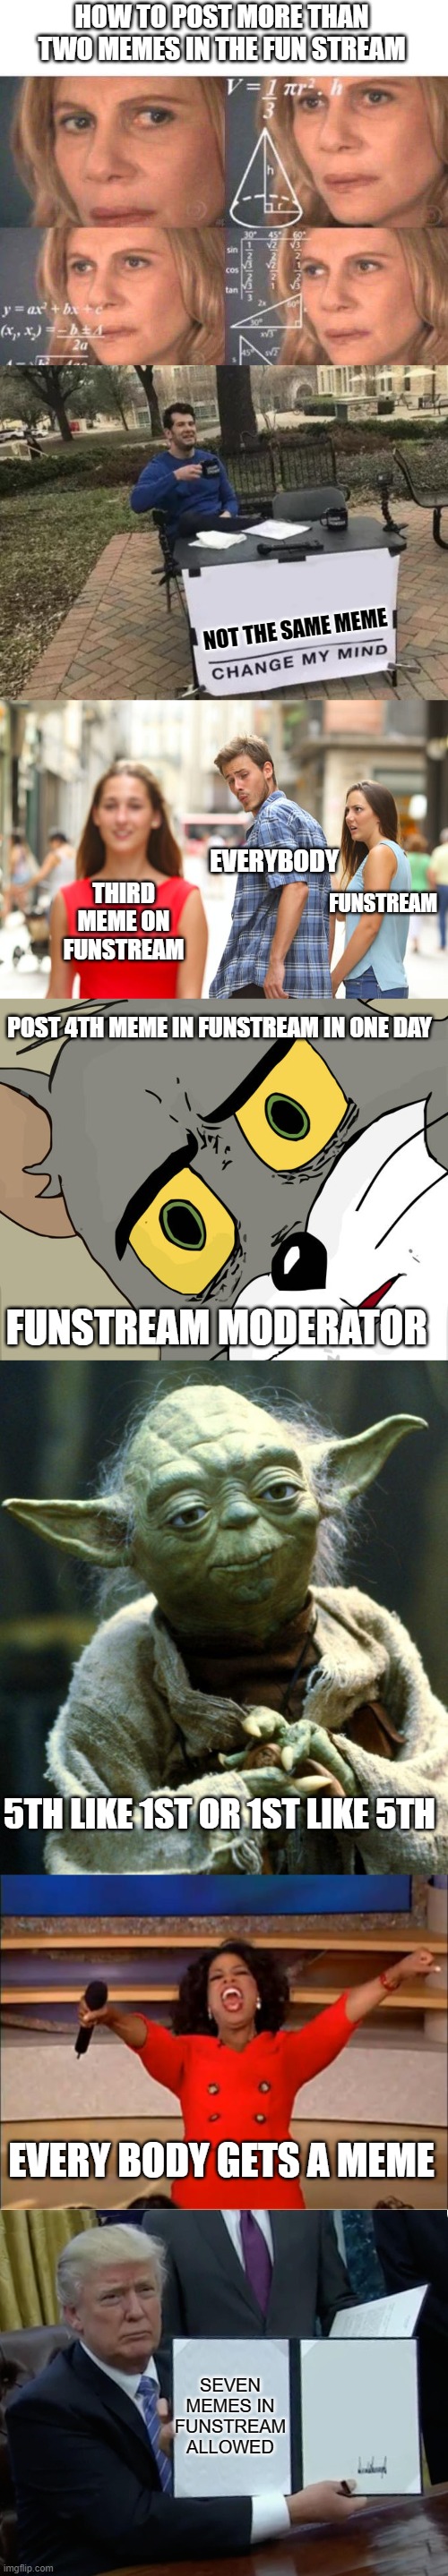 HOW TO POST MORE THAN TWO MEMES IN THE FUN STREAM; NOT THE SAME MEME; EVERYBODY; FUNSTREAM; THIRD MEME ON FUNSTREAM; POST 4TH MEME IN FUNSTREAM IN ONE DAY; FUNSTREAM MODERATOR; 5TH LIKE 1ST OR 1ST LIKE 5TH; EVERY BODY GETS A MEME; SEVEN MEMES IN FUNSTREAM ALLOWED | image tagged in math lady/confused lady,memes,change my mind,distracted boyfriend,star wars yoda,funny | made w/ Imgflip meme maker